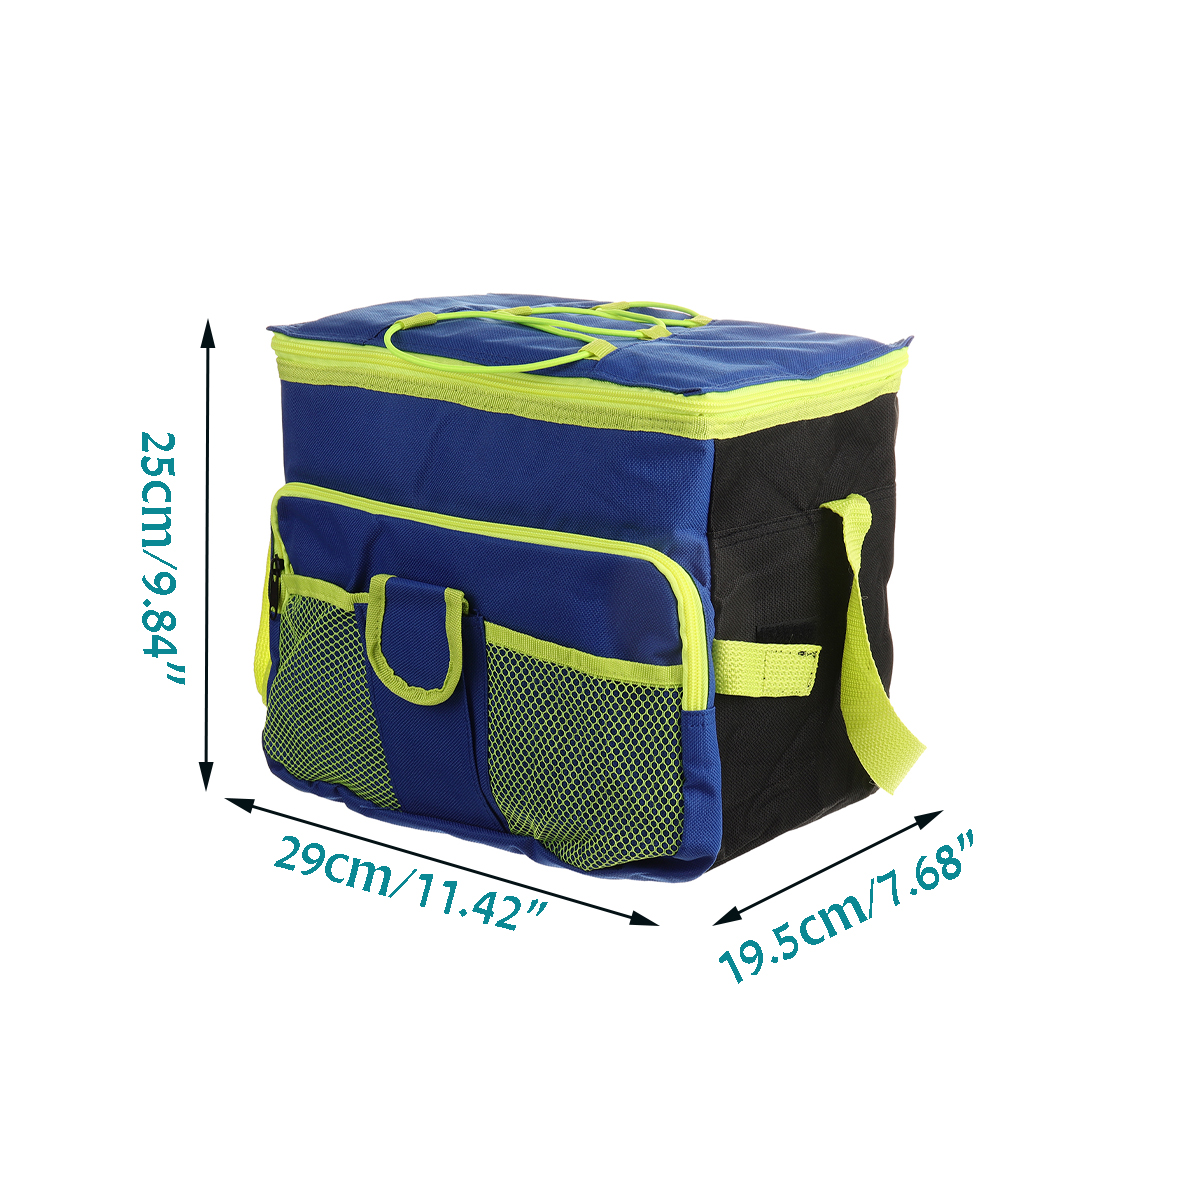 3L-Insulated-Lunch-Bag-Food-Container-Box-Bag-Food-Delivery-Bag-Waterproof-Lightweight-Grocery-Stora-1731824-2